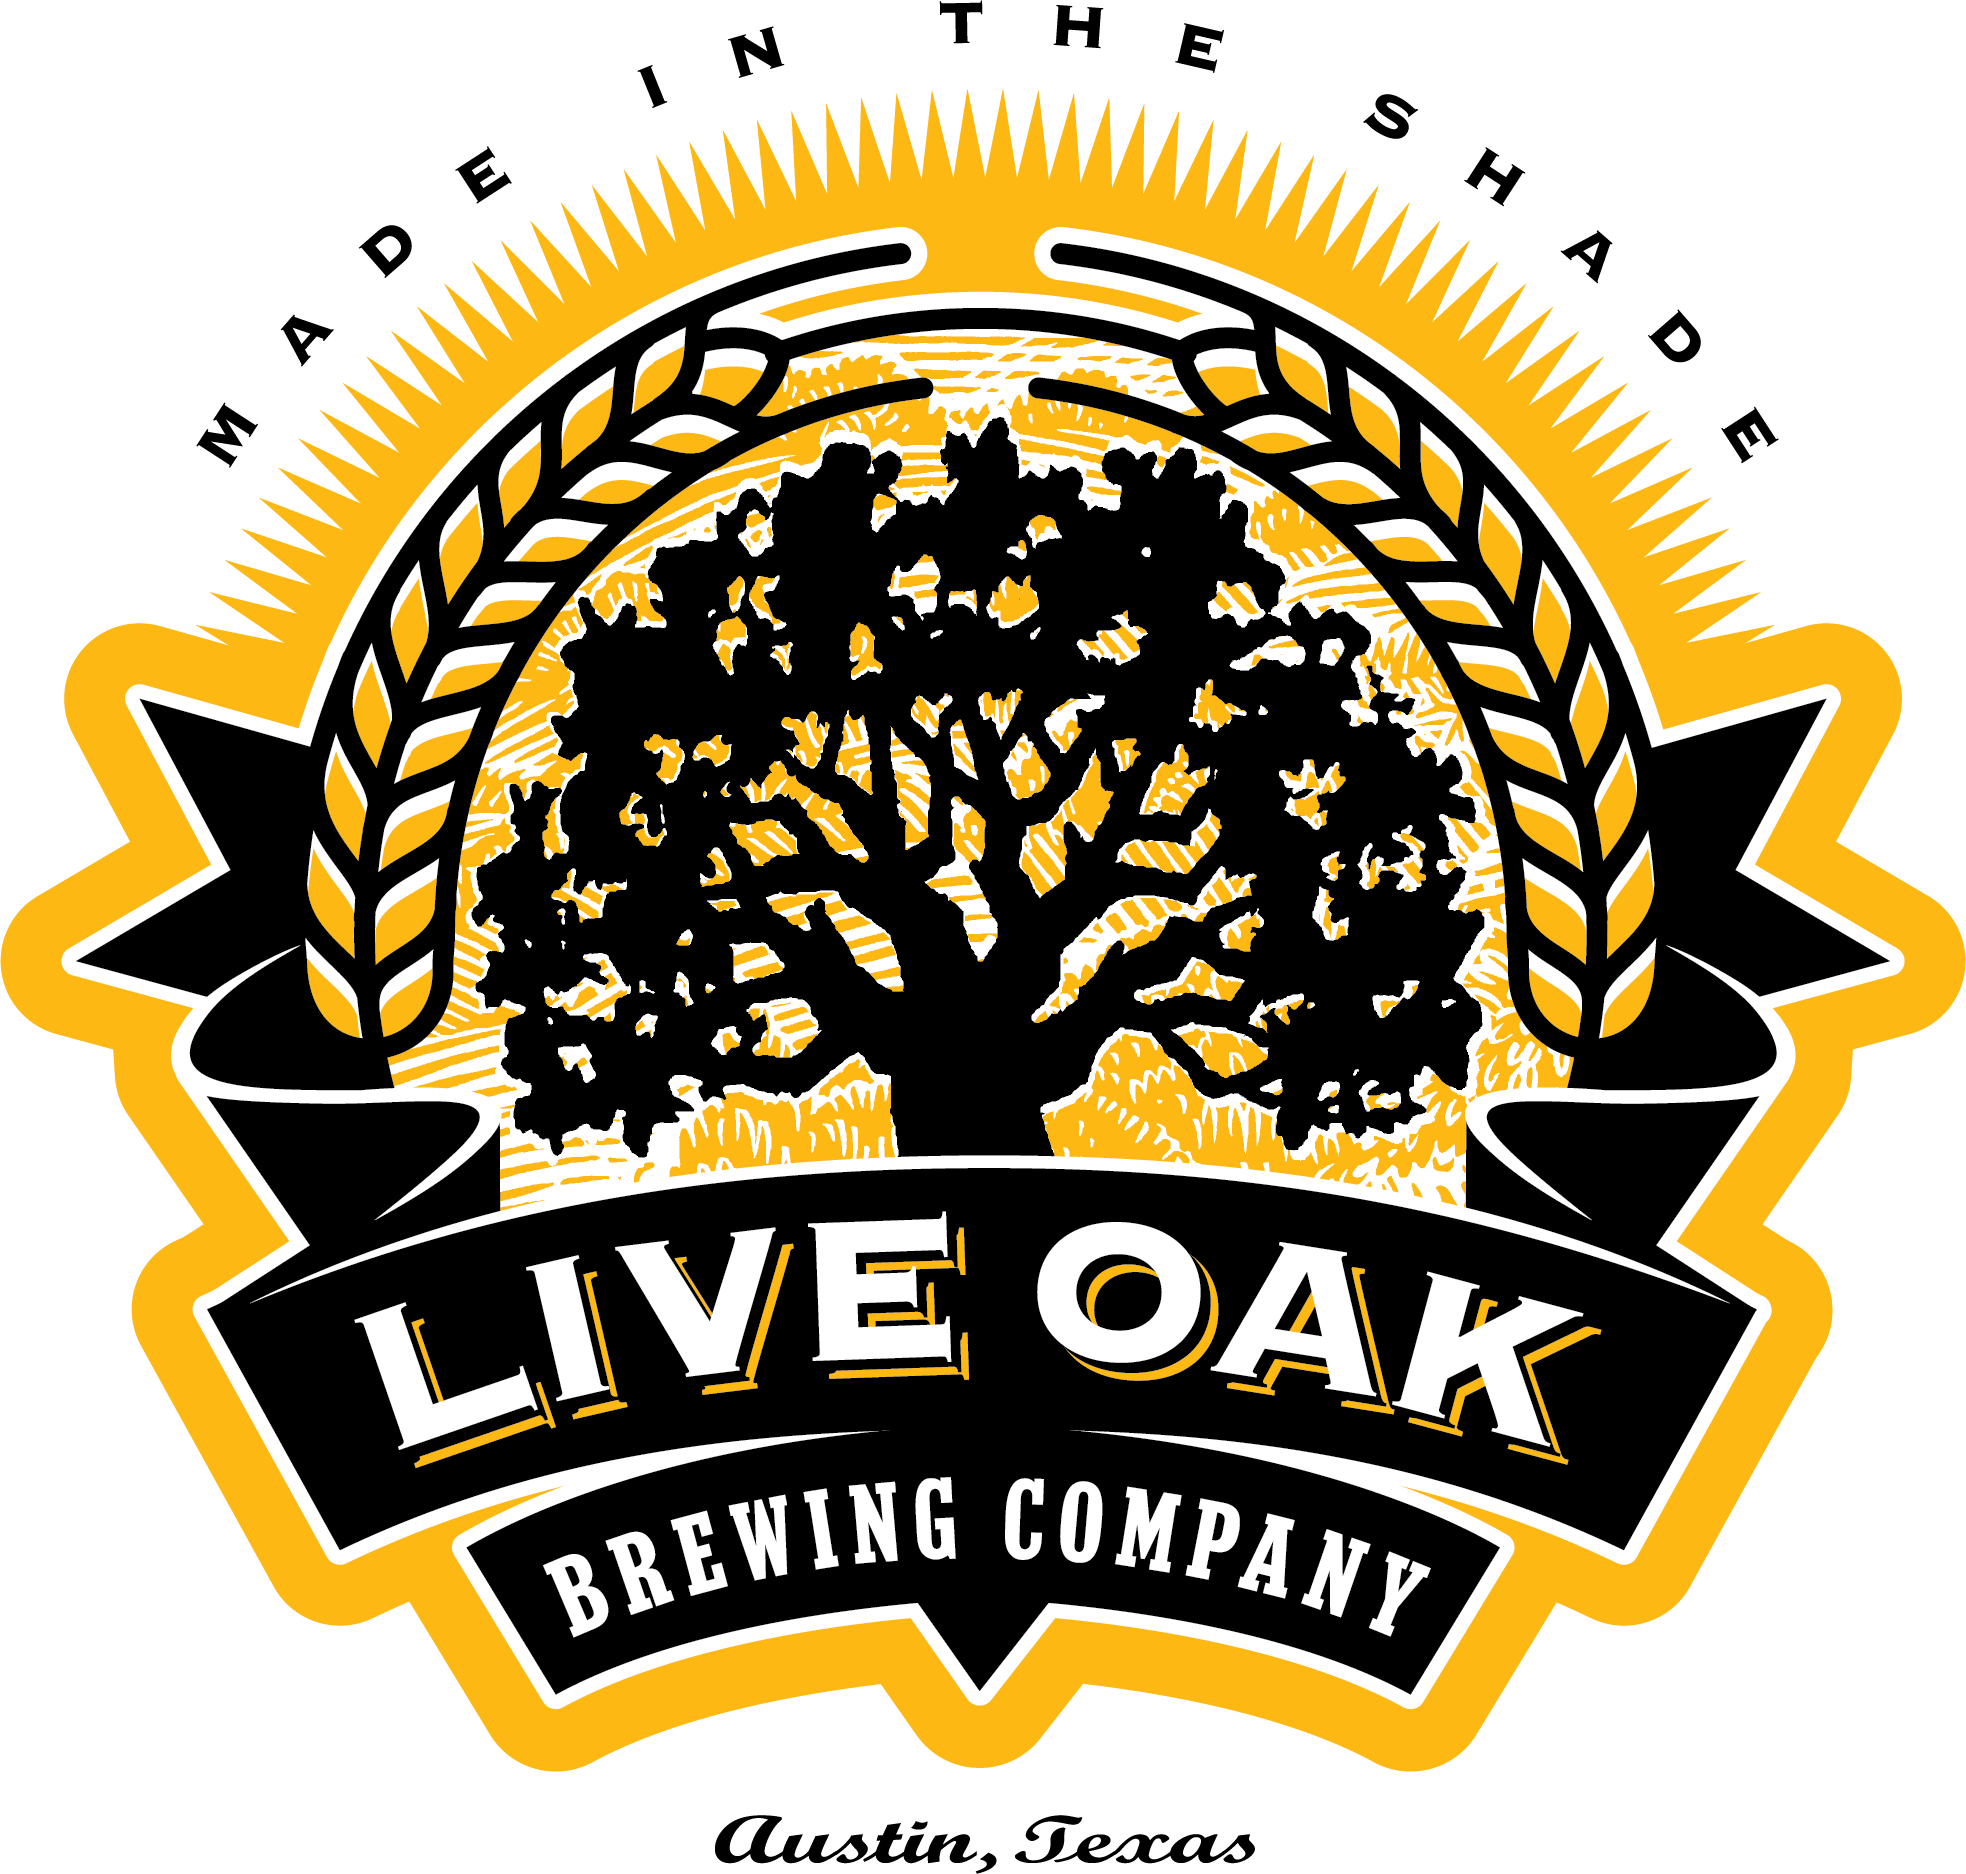 Join us at Live Oak Brewery!